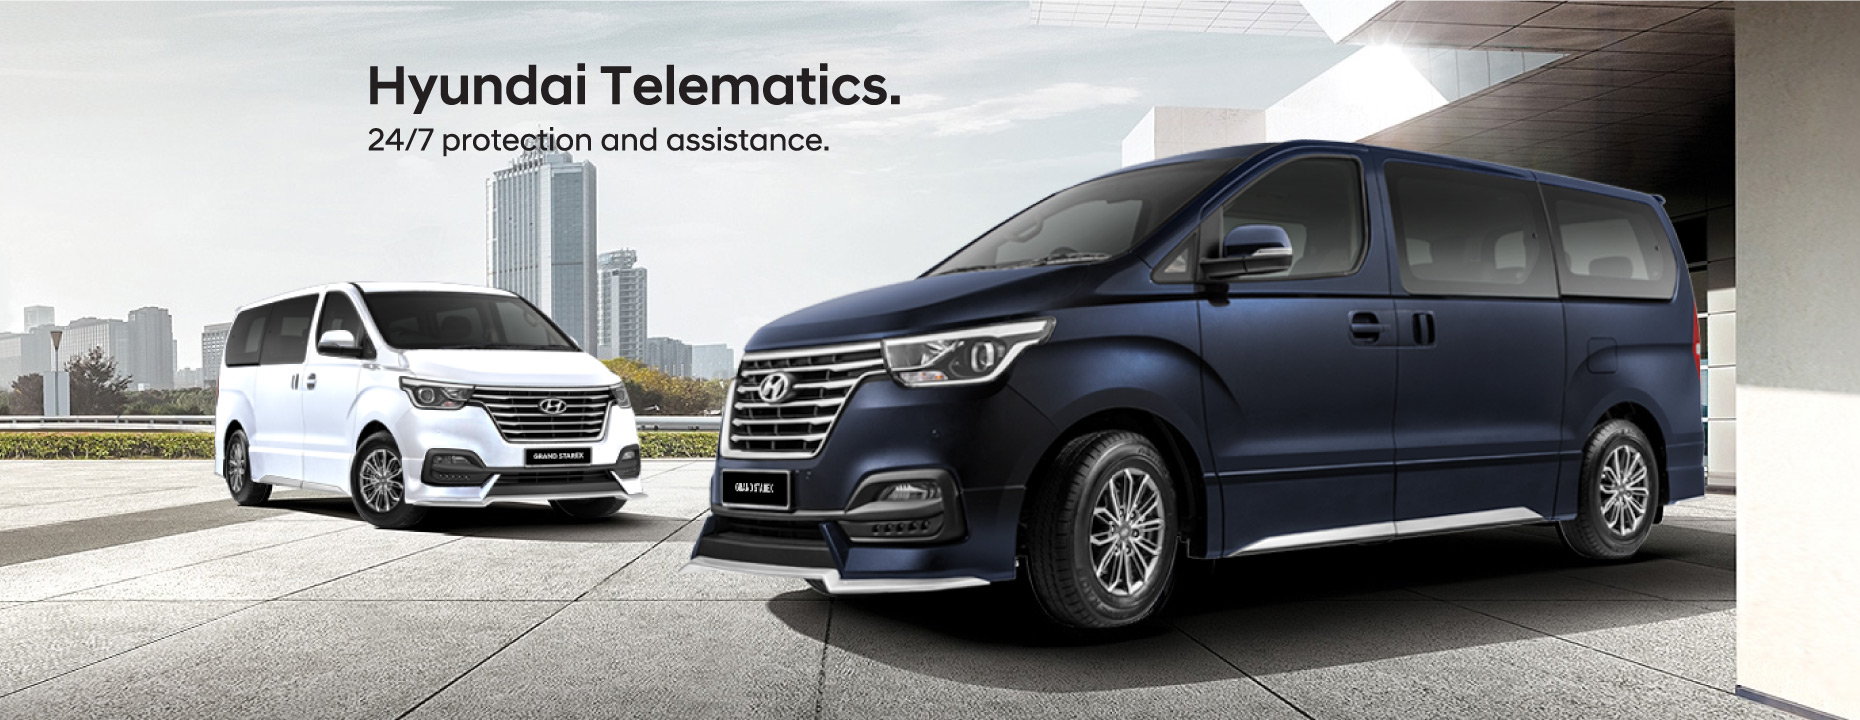 Hyundai Telematics - 24/7 protection and assistance. eCall - automatic Accident Detection | Manual eCall : Emergency Assistance | bCall : Breakdown Assistance. | Service Assist | Mobile App - Connected Security Features | Stolen Vehicle Tracking